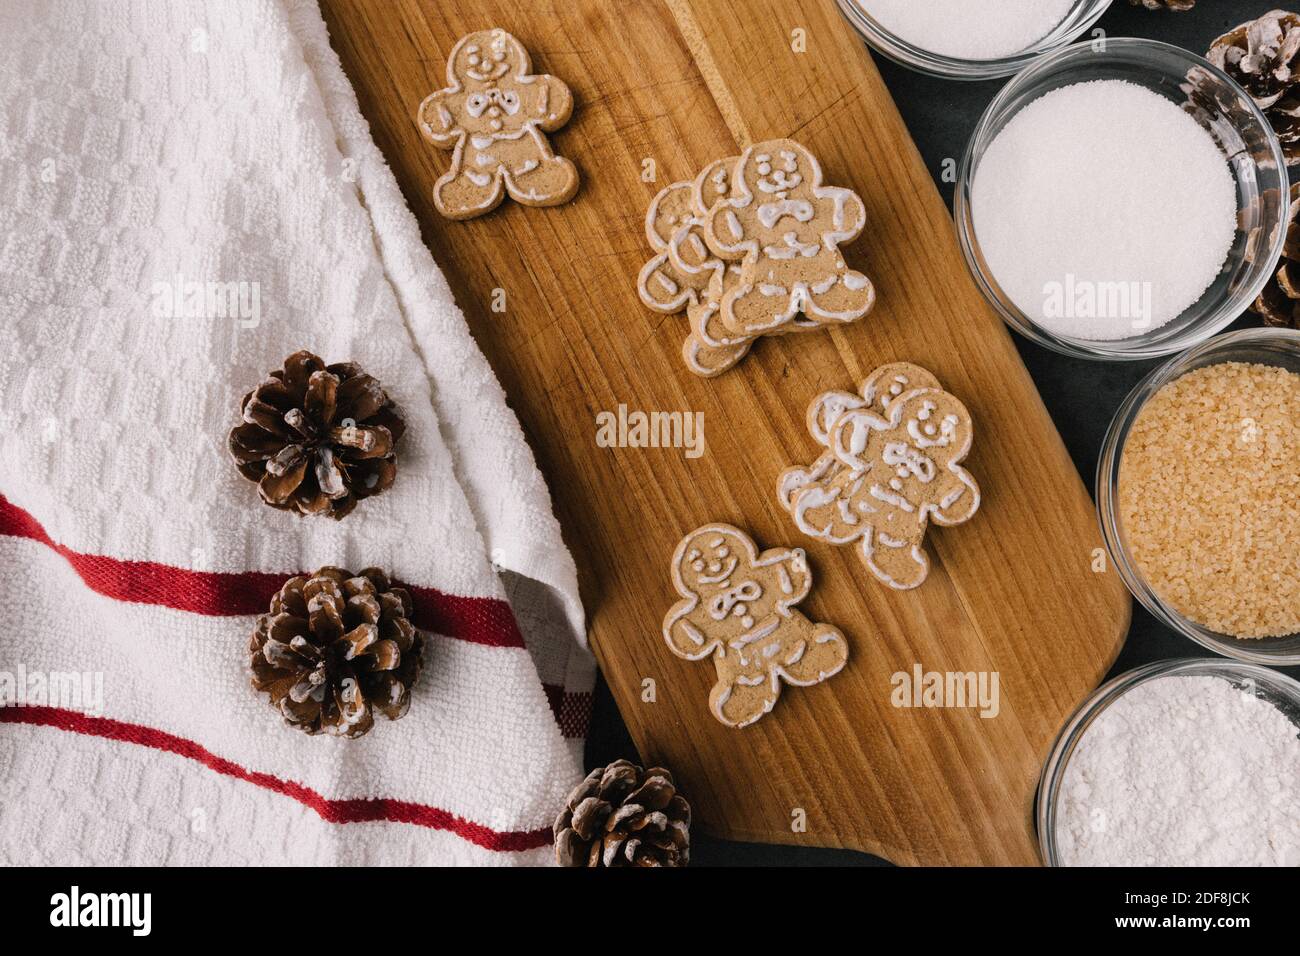 Christmas Gingerbread Man Cookies on Wooden Board With Ingredients Stock Photo